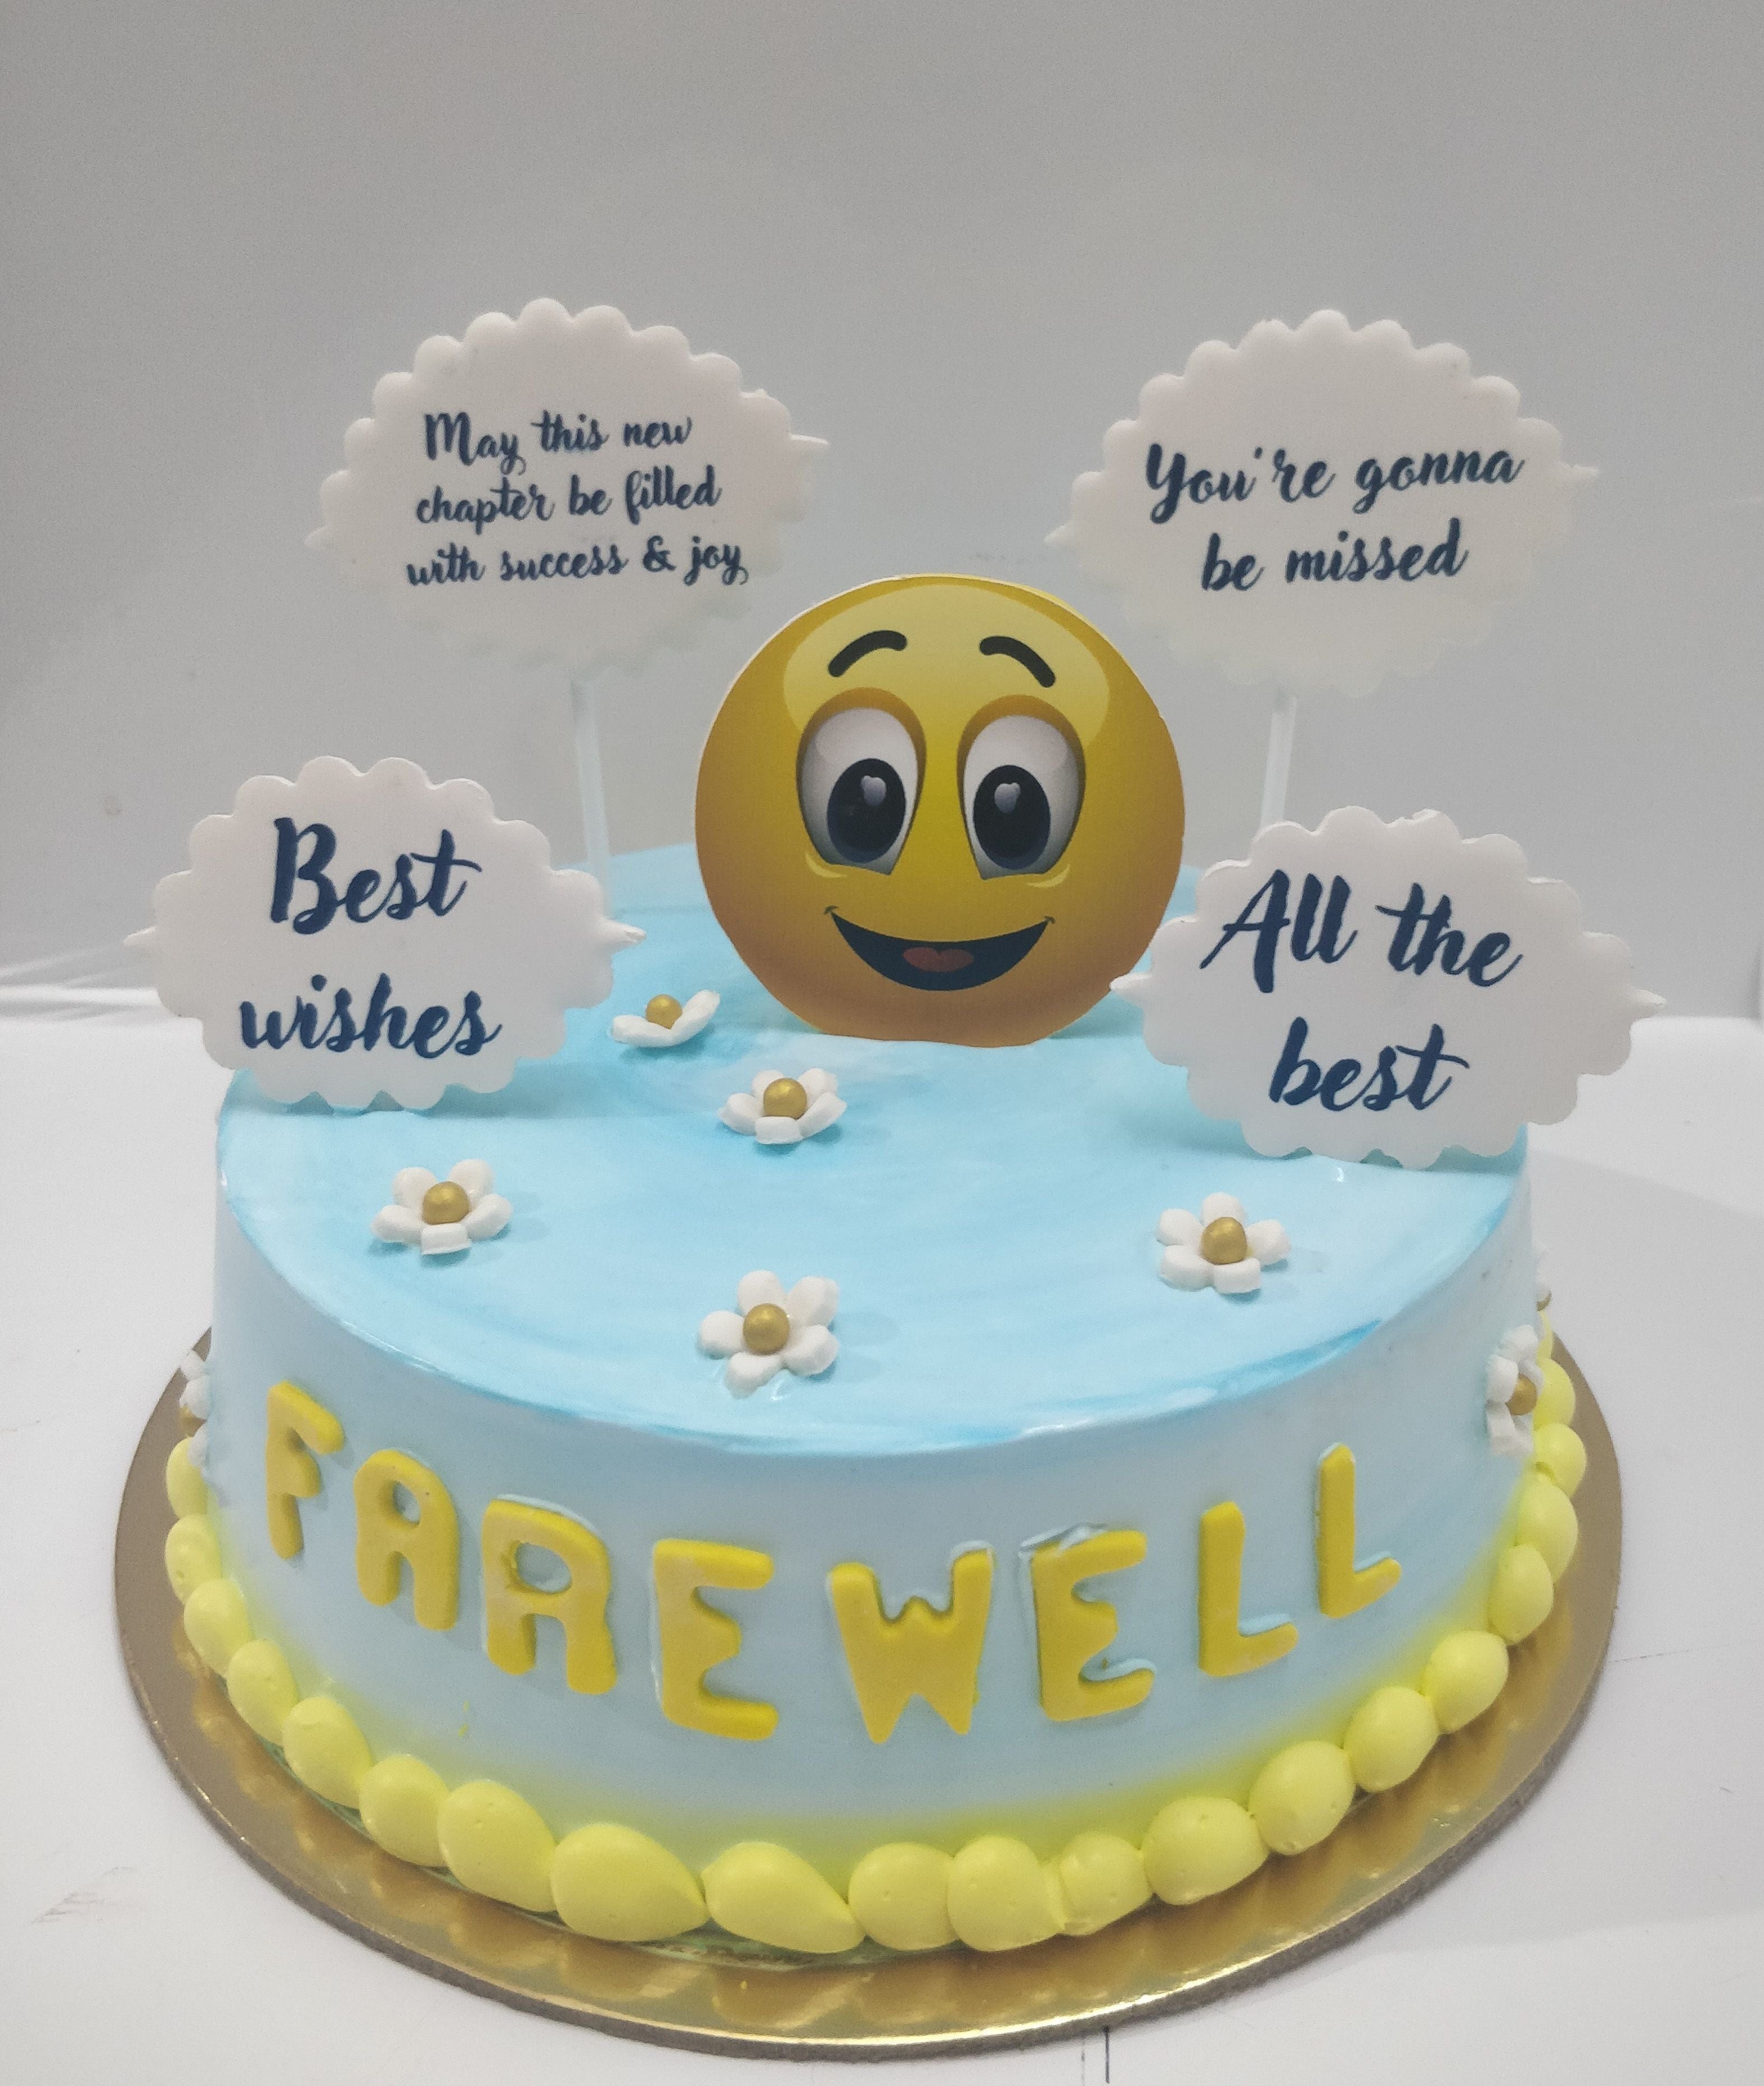 250+ Farewell Cake Messages! (Funny, Short, Going Away) - Thewordyboy